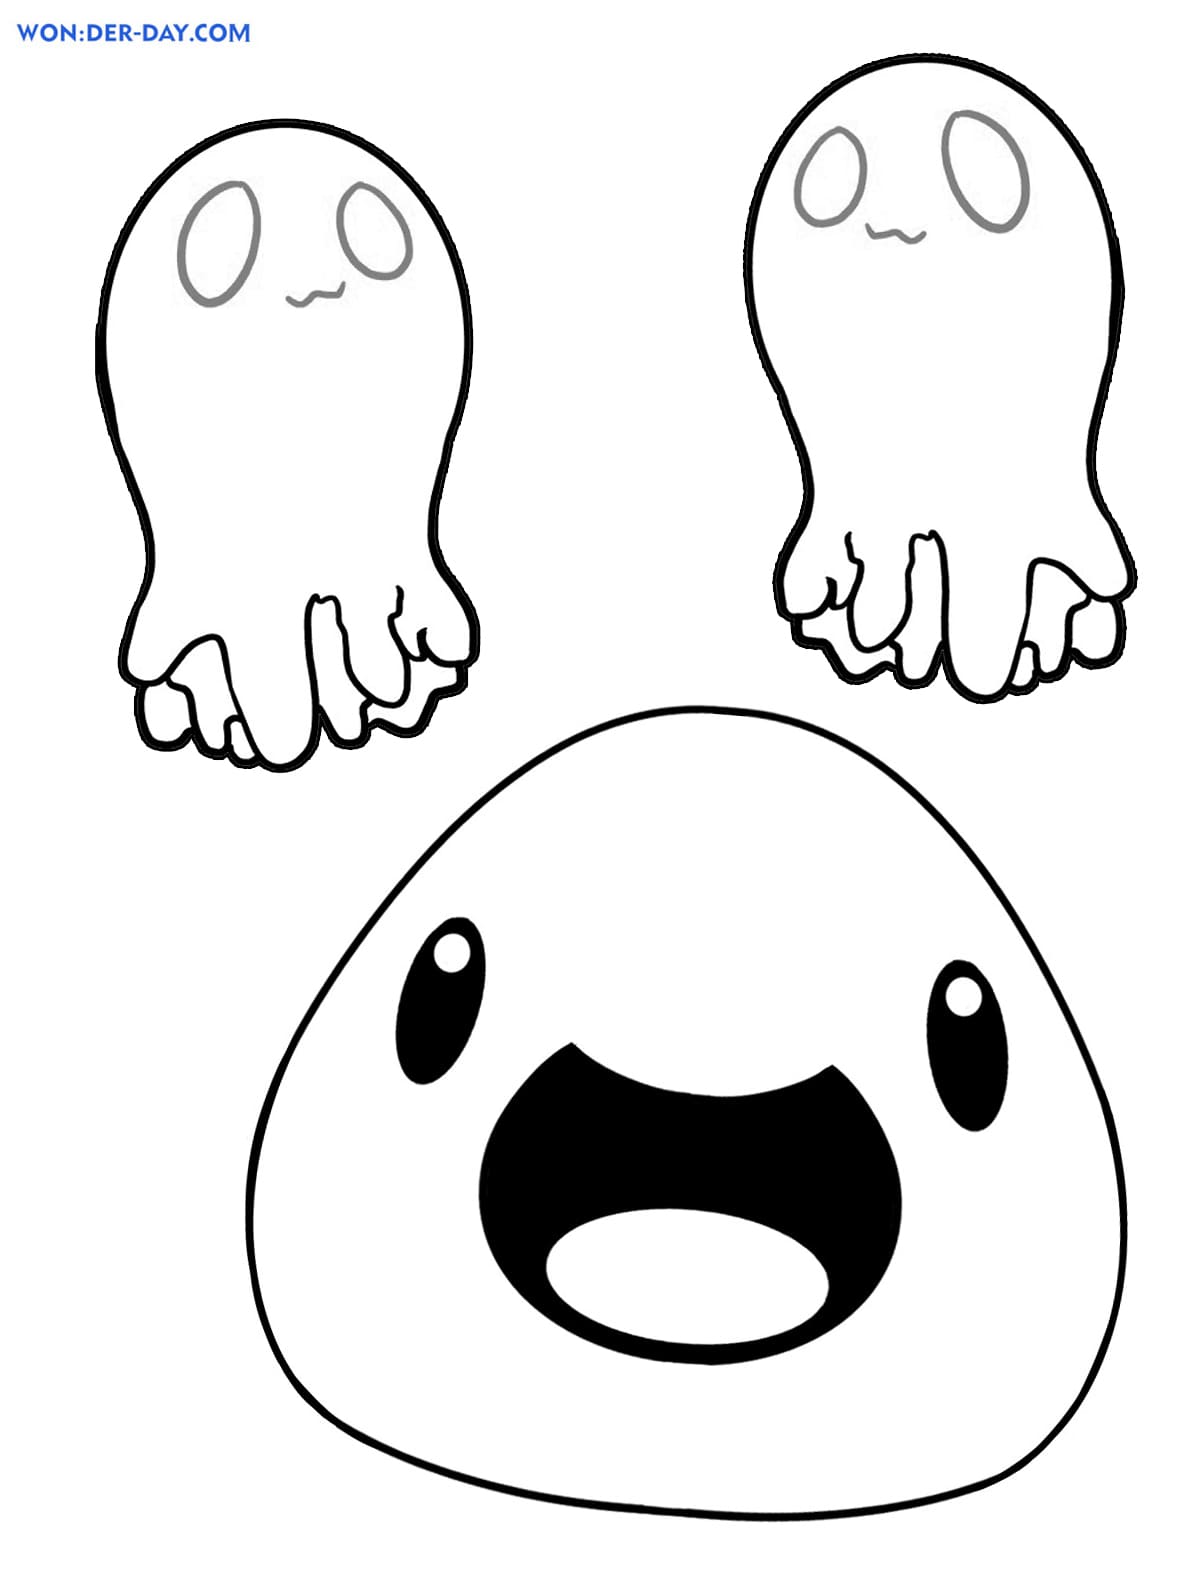 Slime Coloring pages . Print for kids | WONDER DAY — Coloring pages for